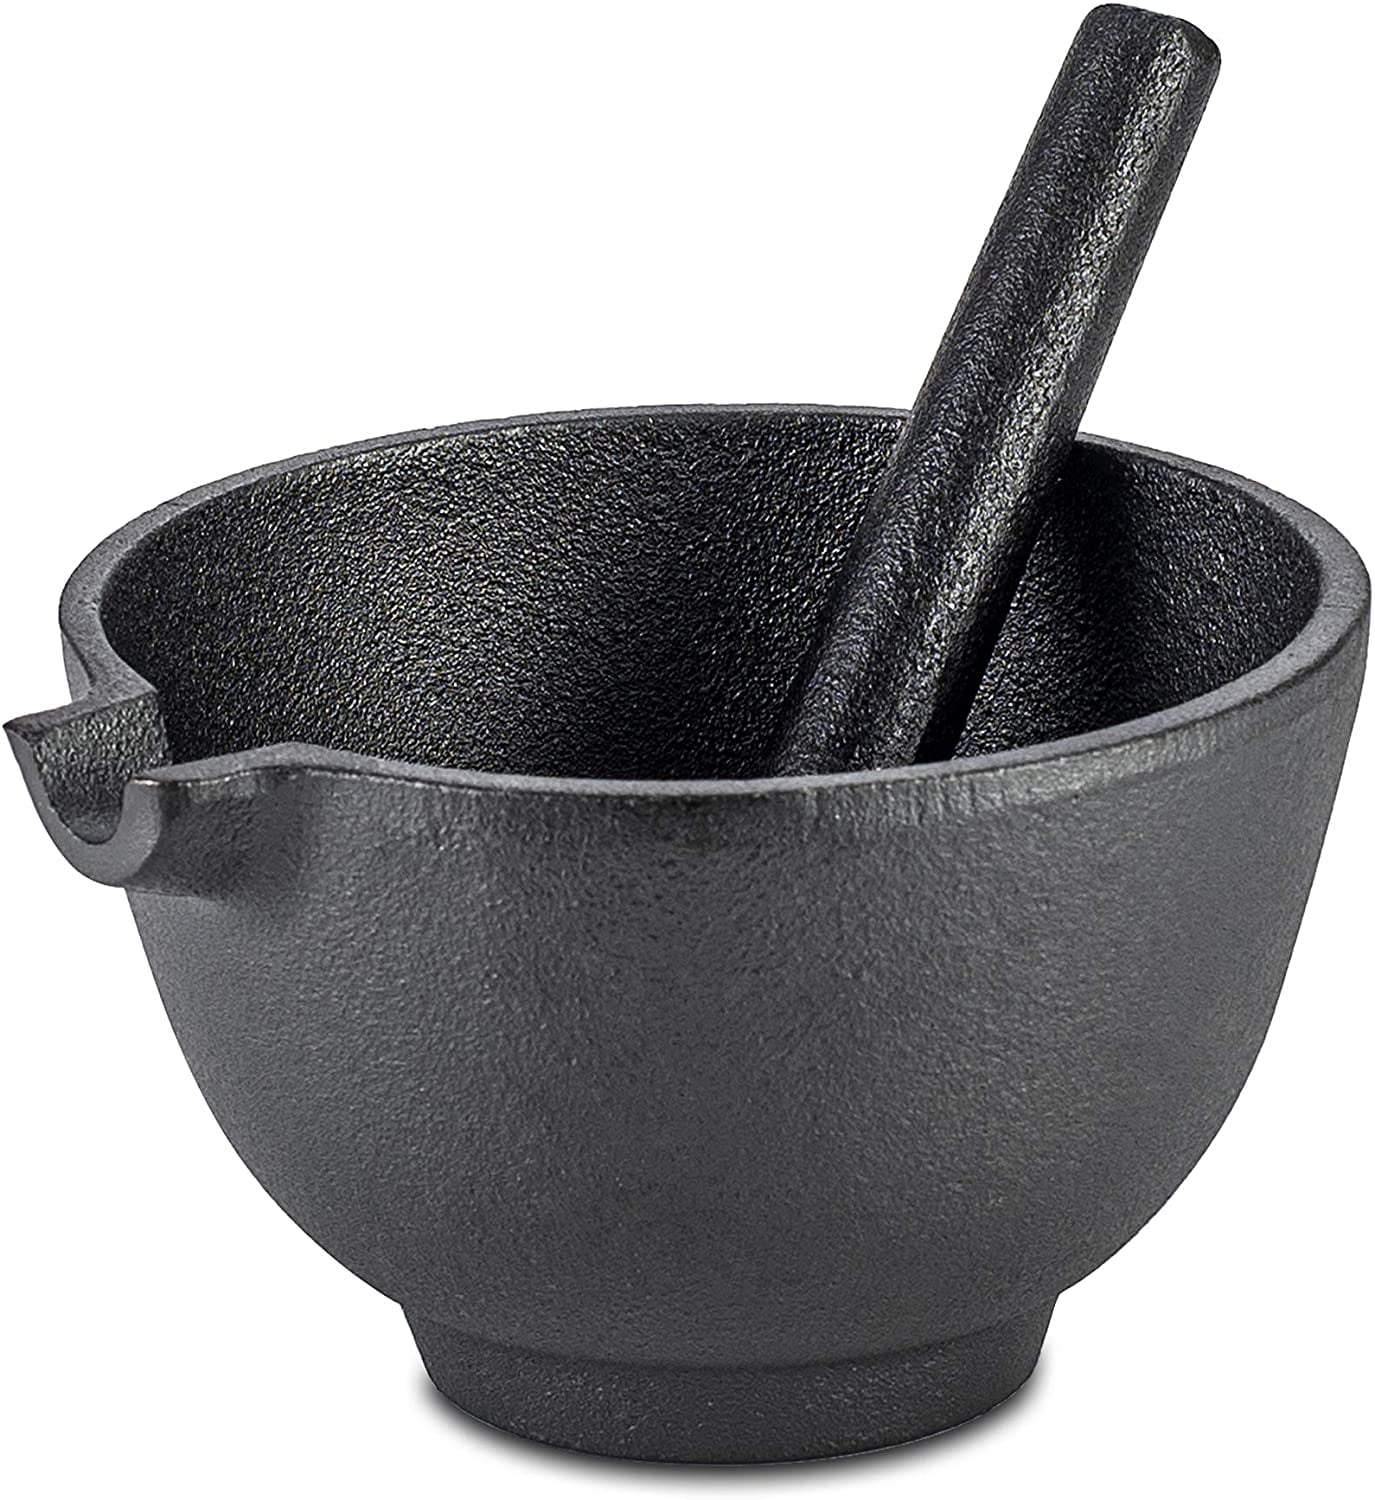 Large Pestle and Mortar Set Durable Granite Stone Spice & Herb Solid Crusher UK 